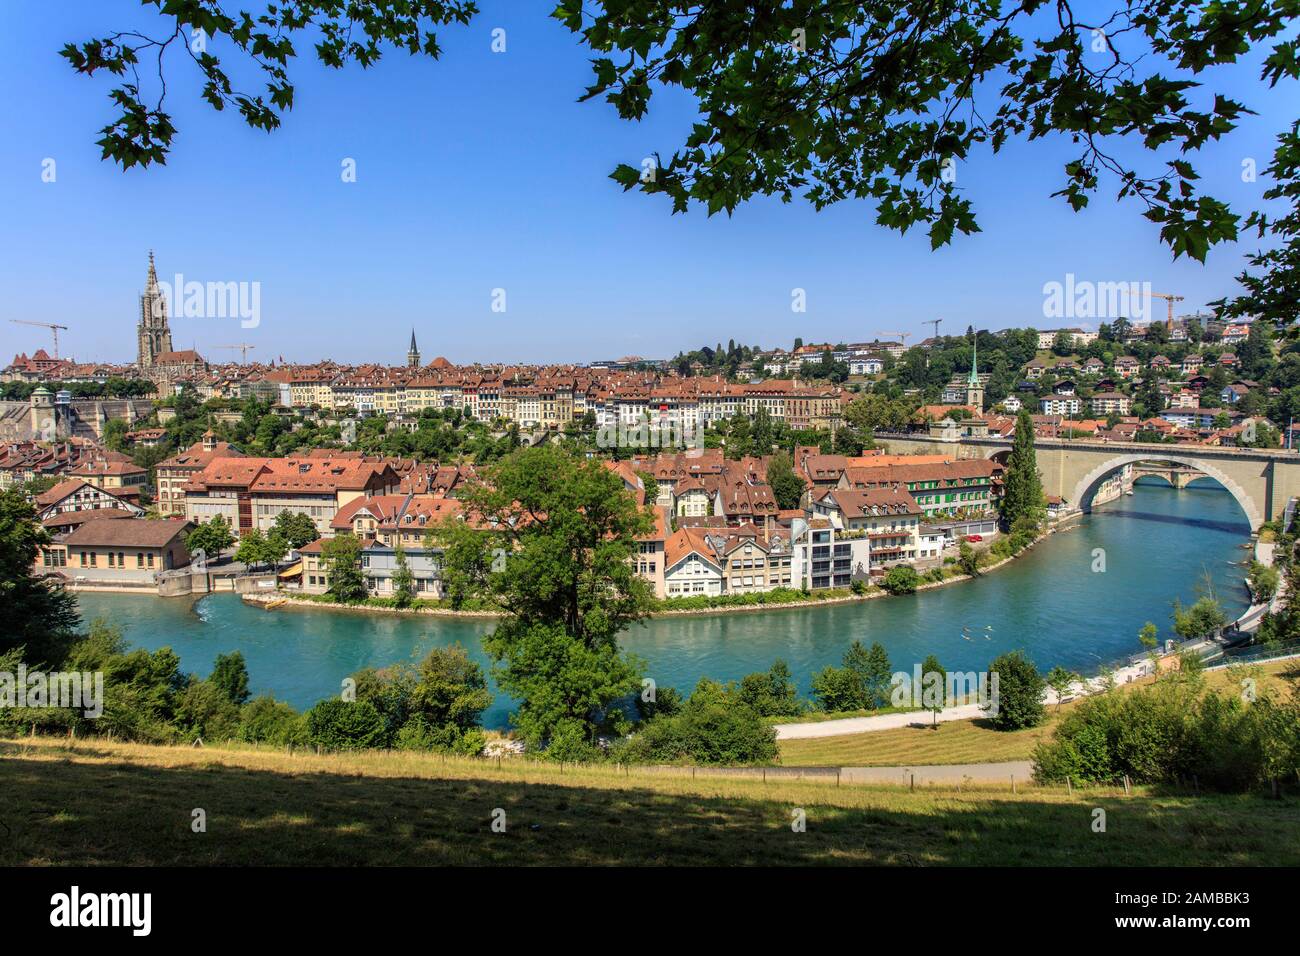 Bern old town and the river Aare, Switzerland Stock Photo